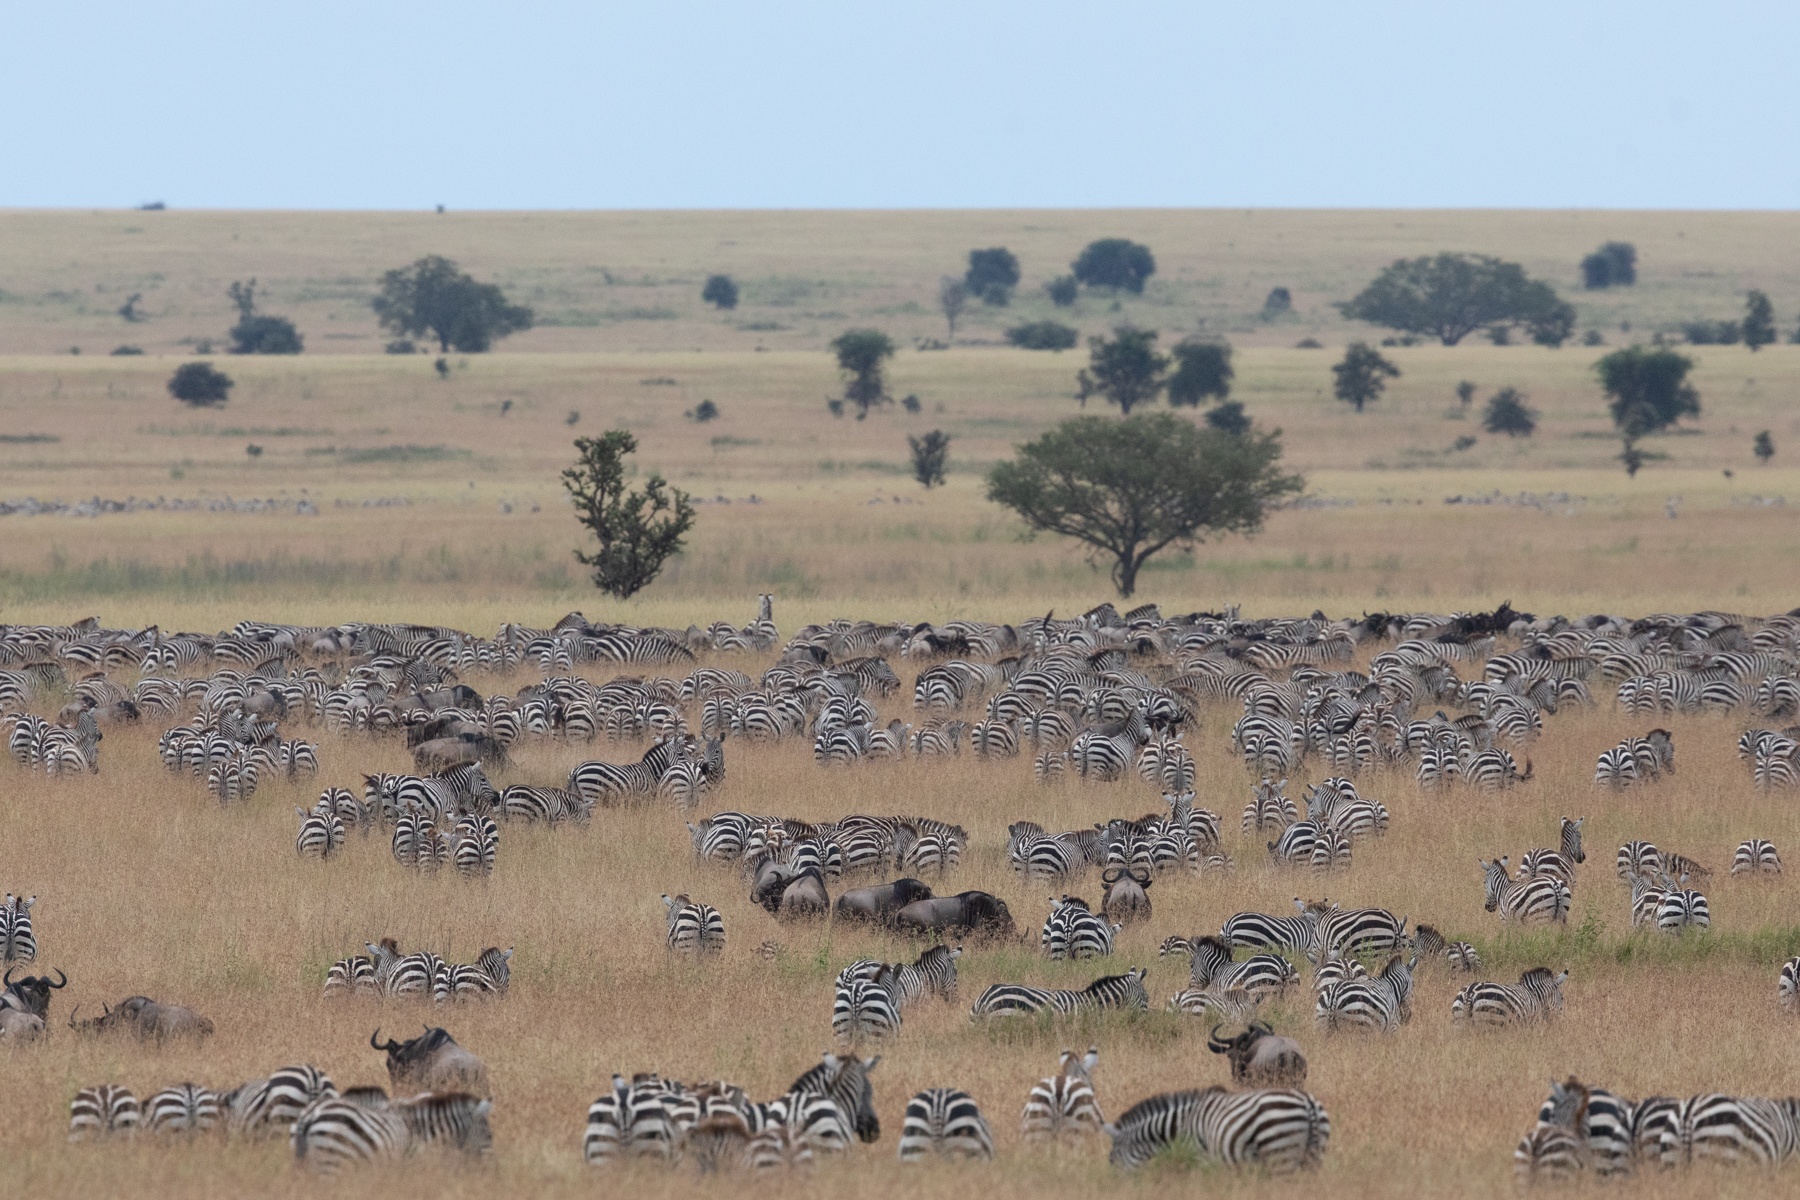 An ocean of Zebra posteriors at one of the migration herds in the Serengeti